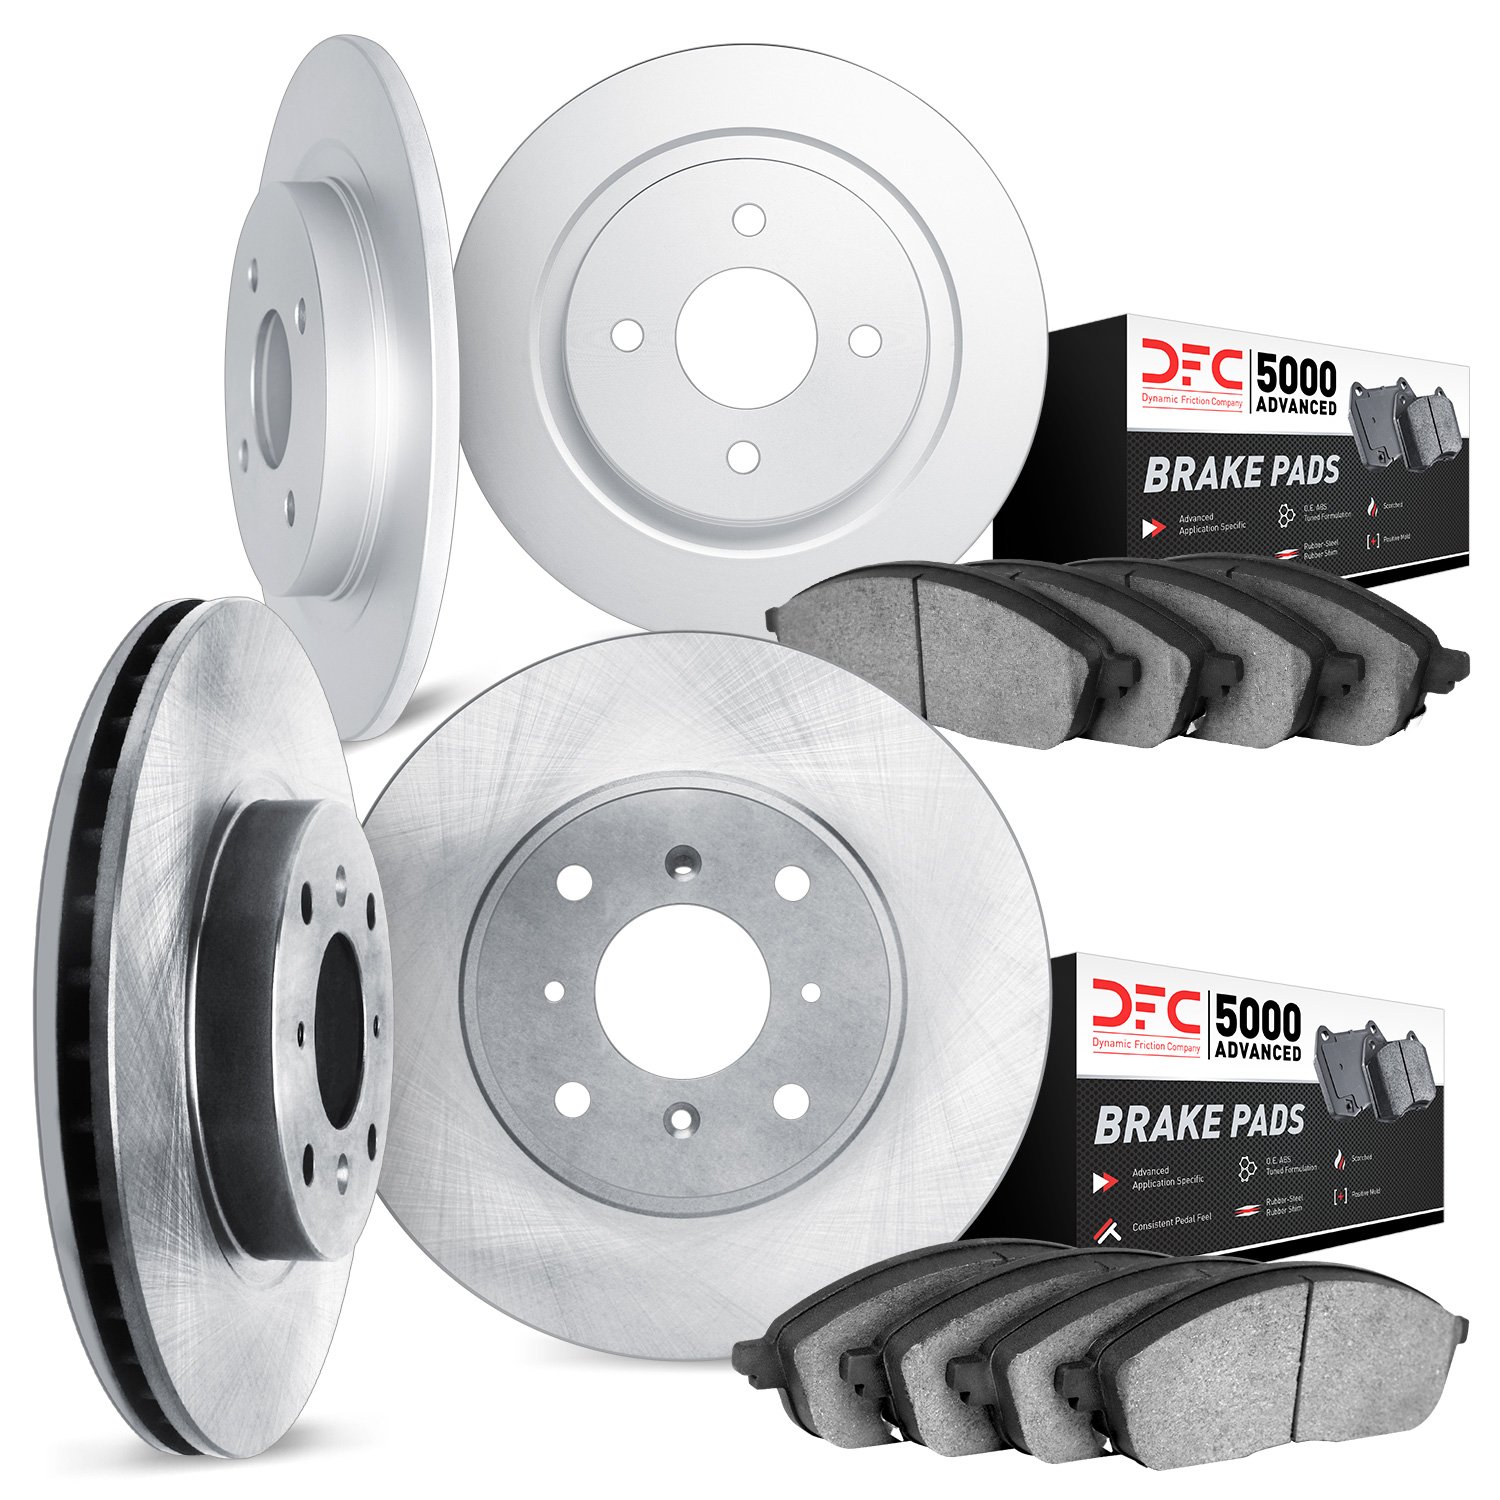 6504-01003 Brake Rotors w/5000 Advanced Brake Pads Kit, 2007-2010 Multiple Makes/Models, Position: Front and Rear